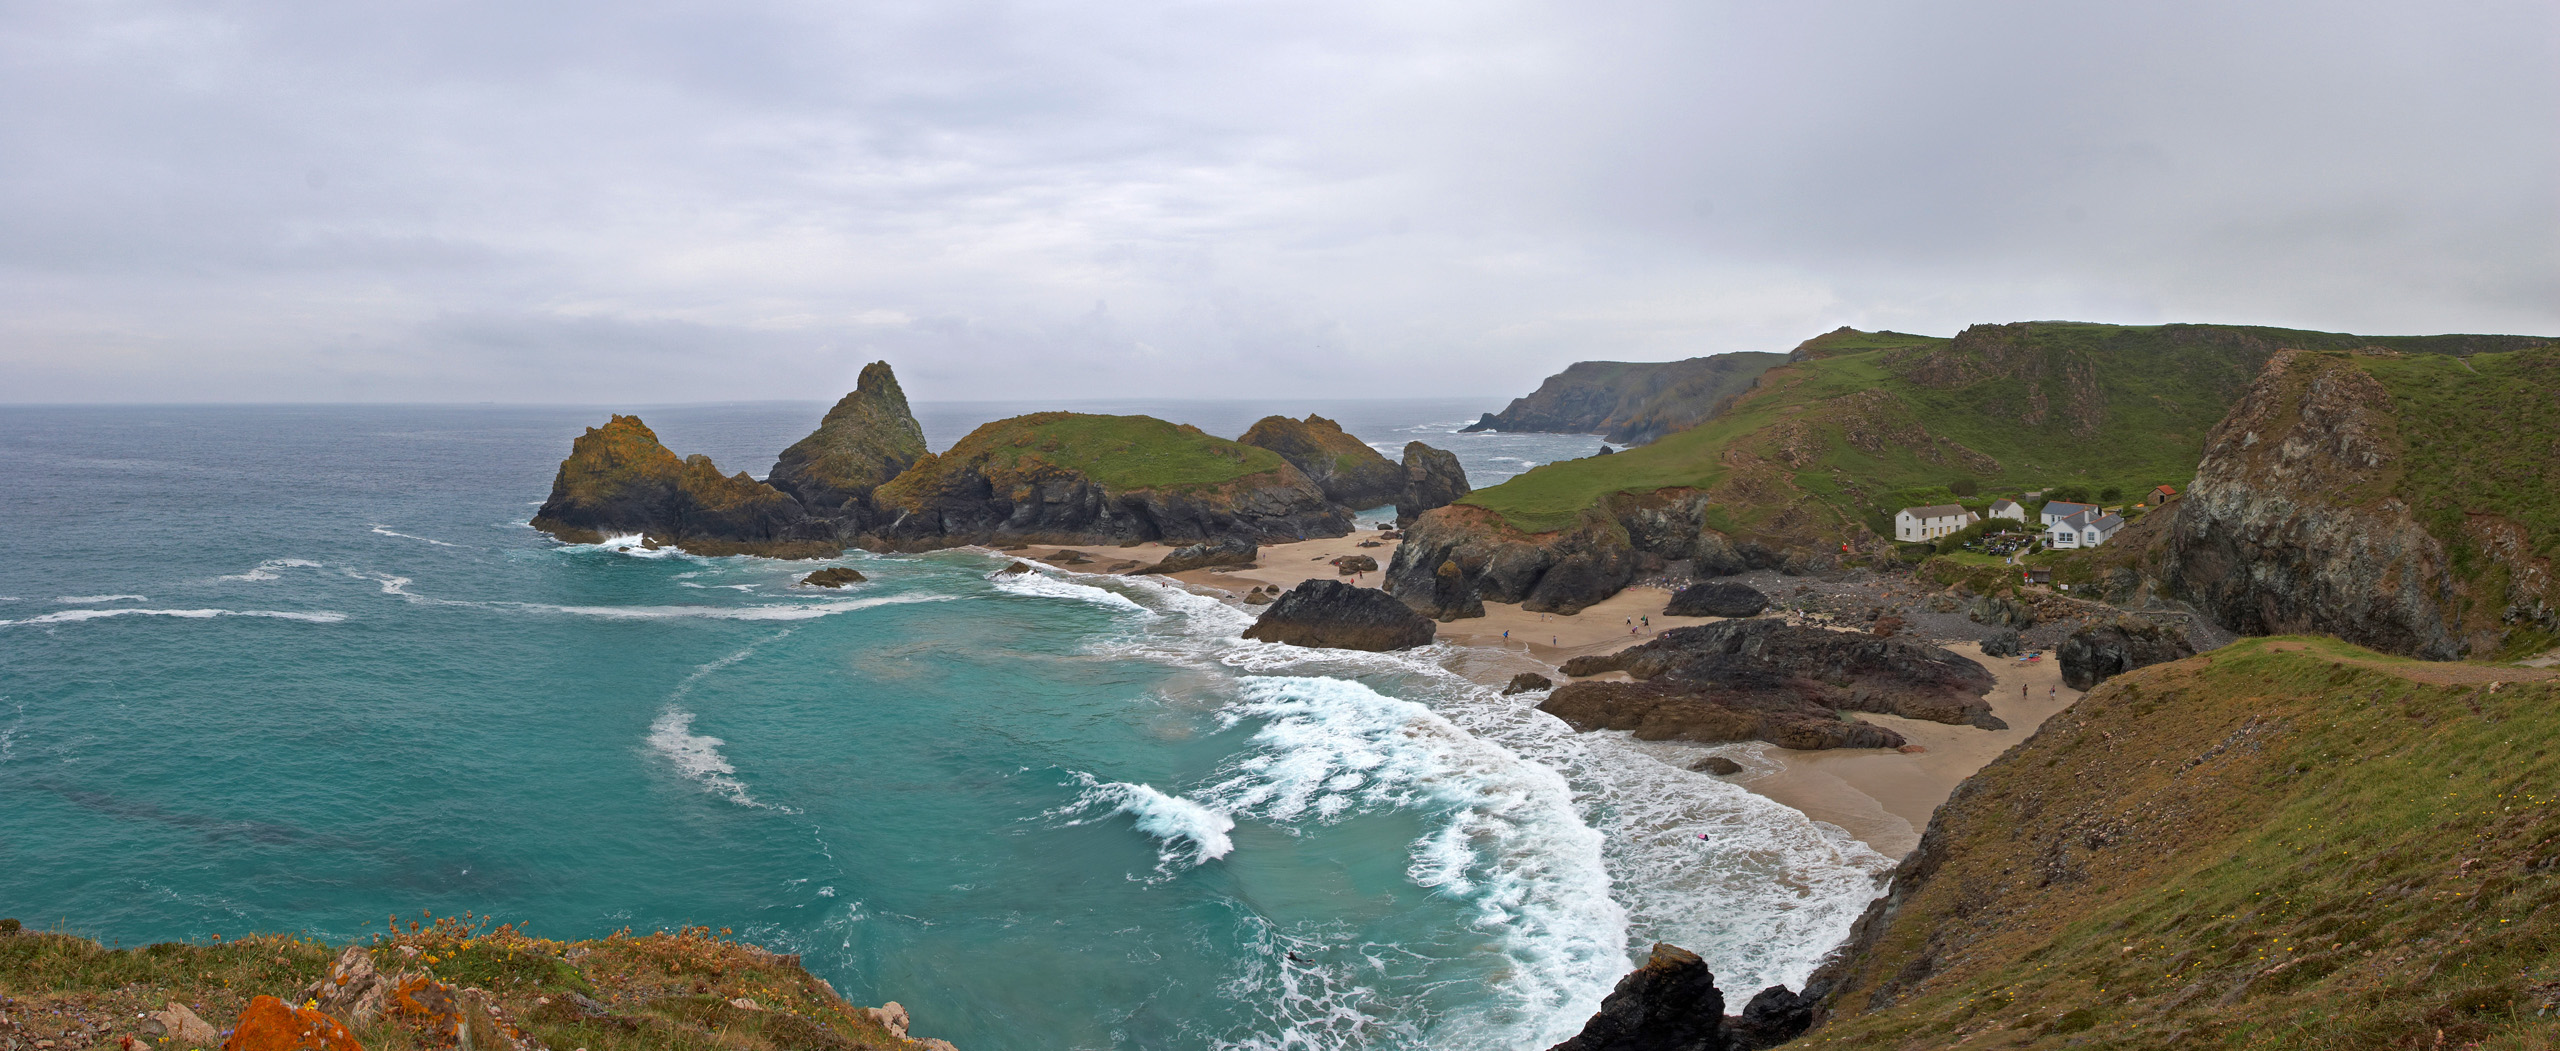 Kynance Cove panorama from the cliffs